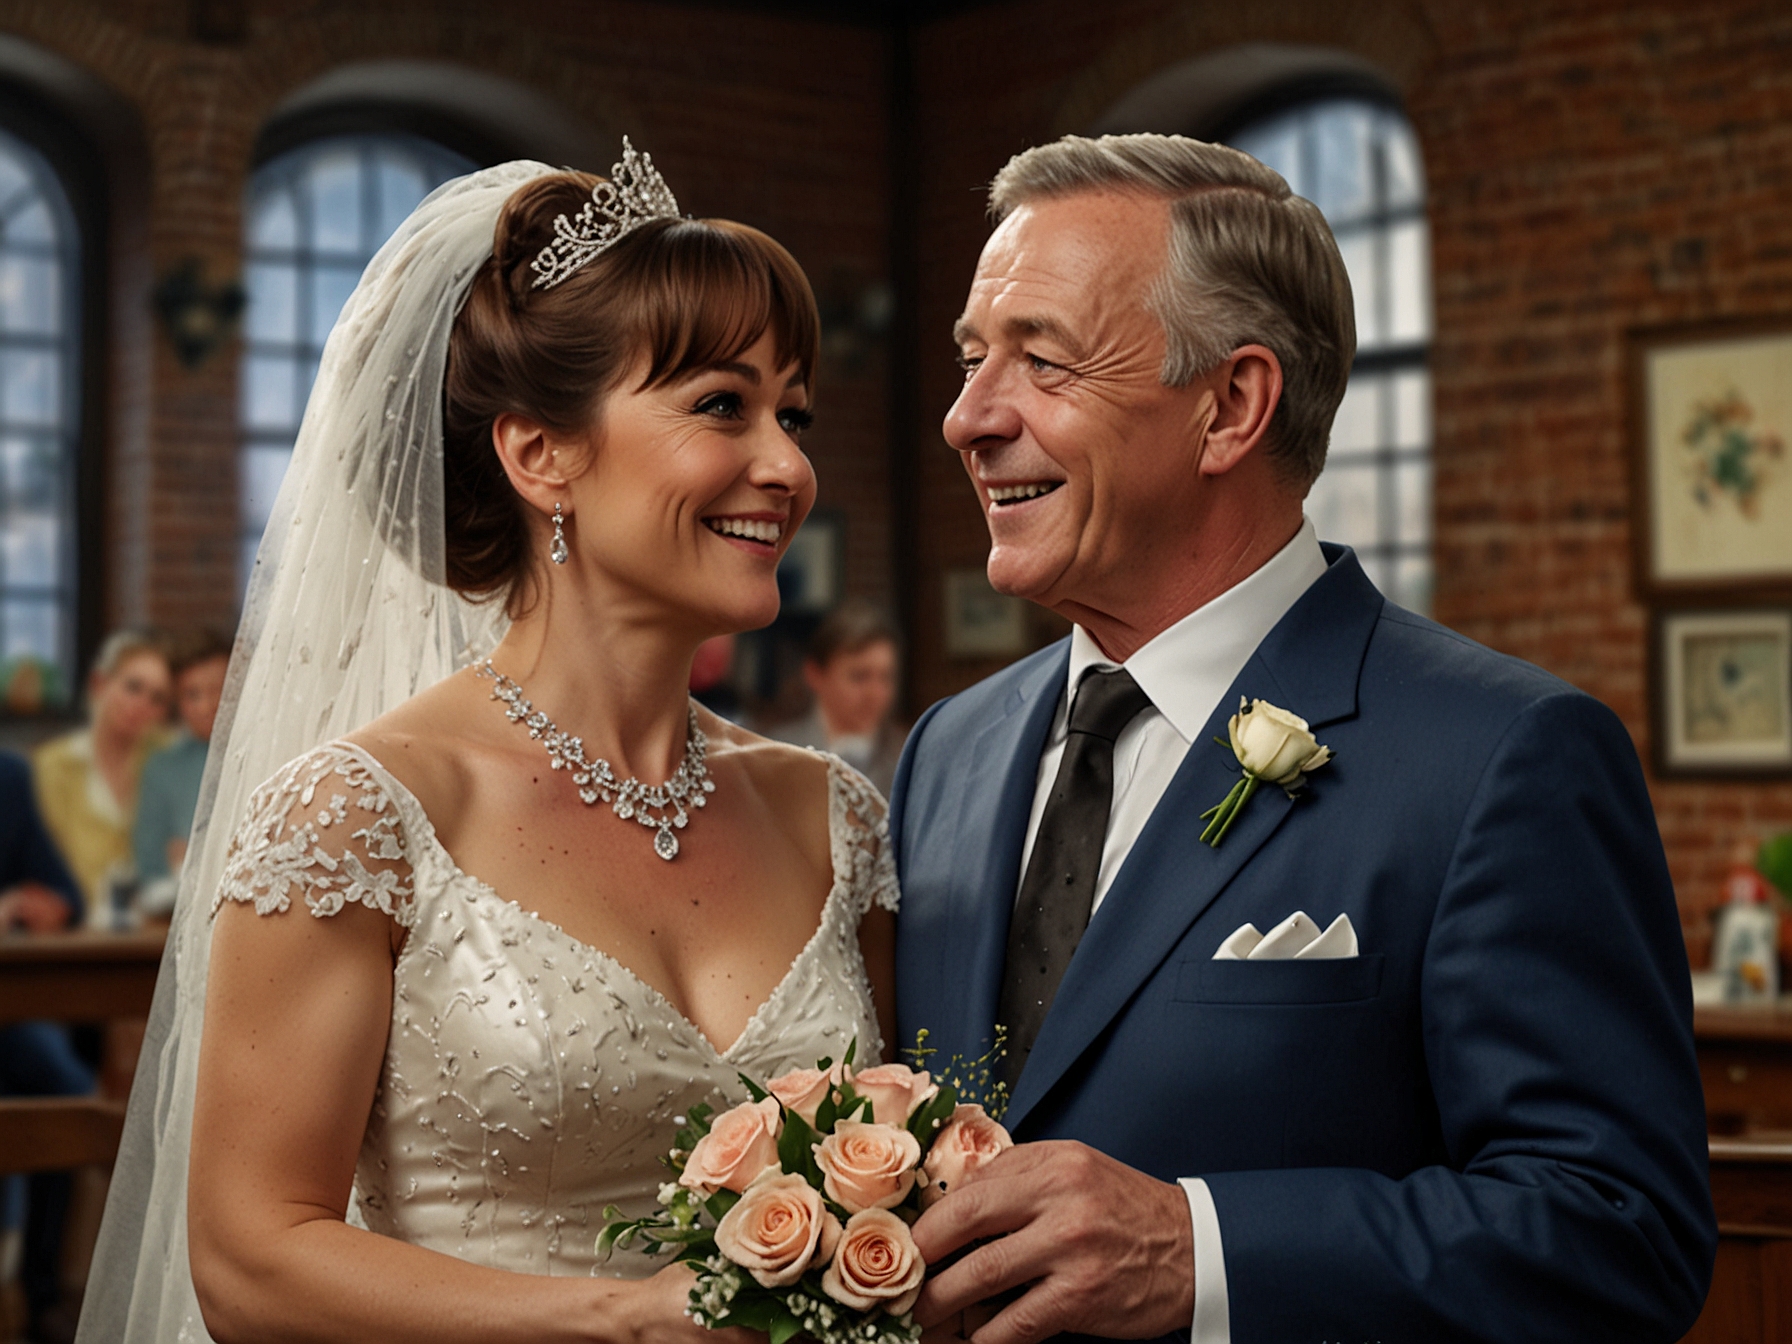 Mavis Wilton and Derek Wilton in a memorable wedding scene from Coronation Street, capturing a significant storyline that resonated deeply with the audience.